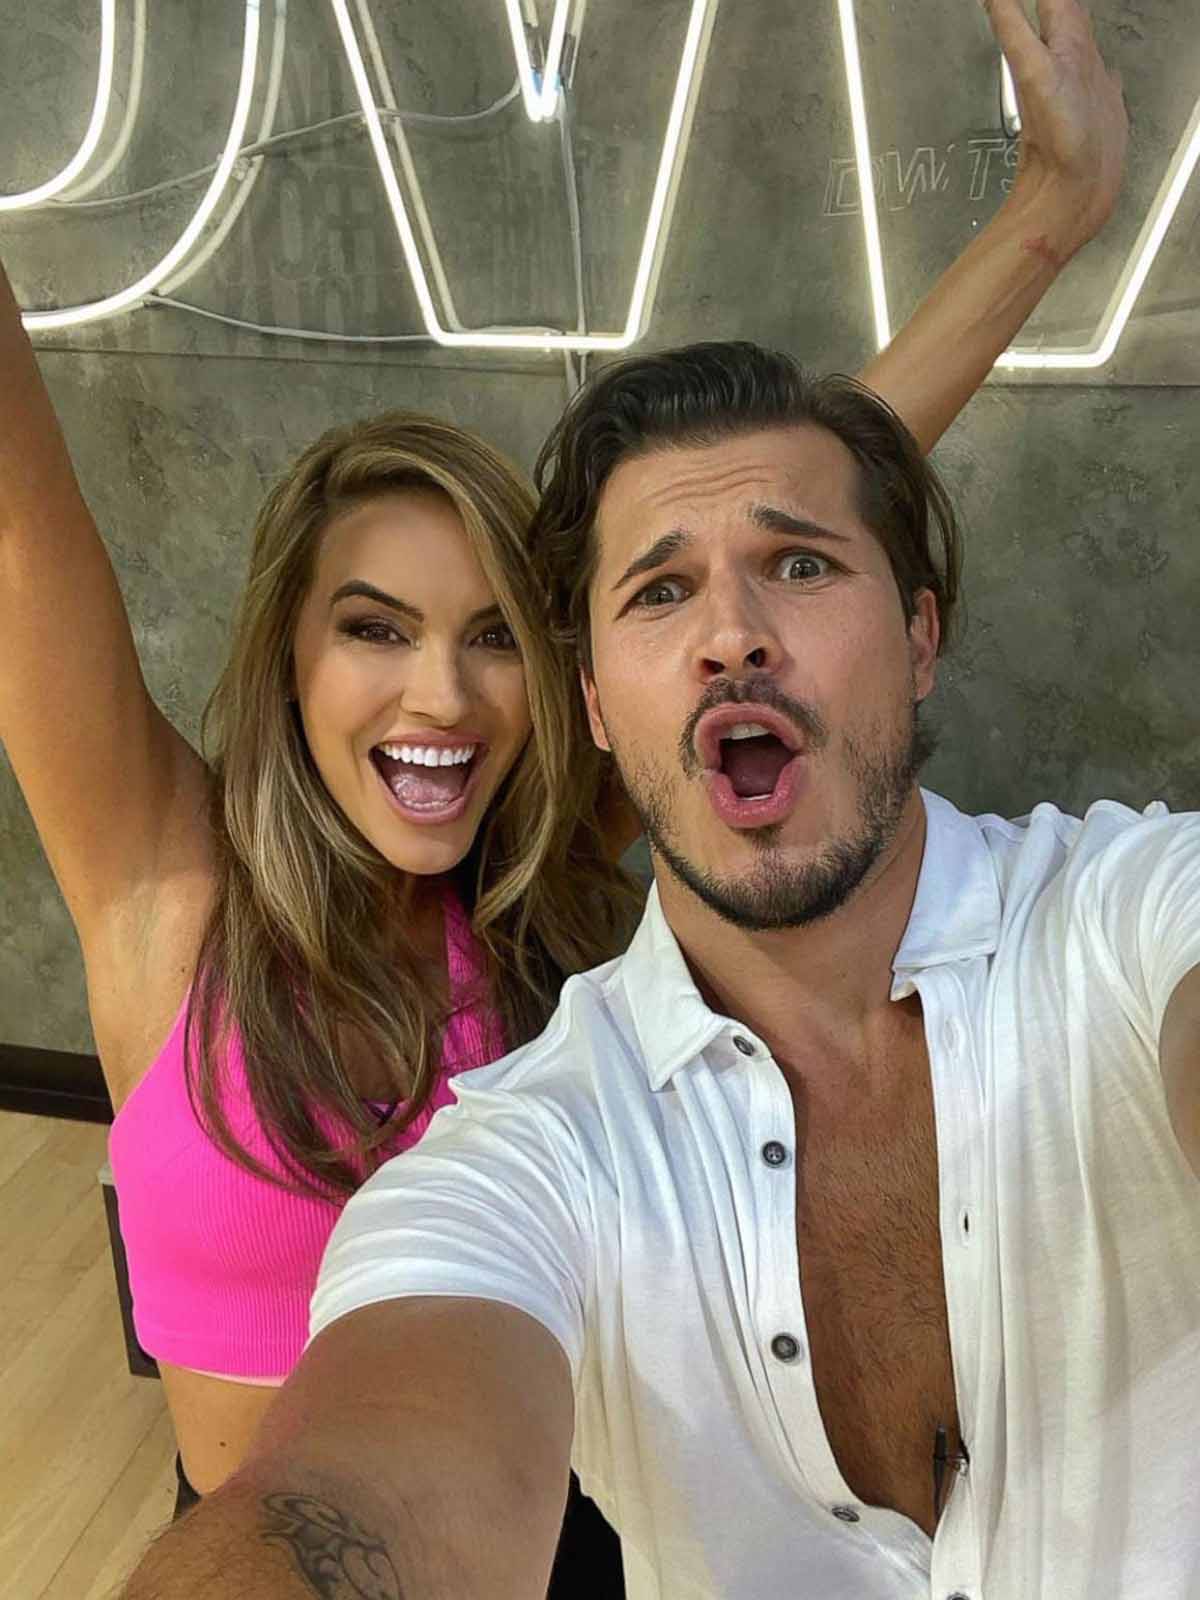 With the recent news of her 'DWTS' partner's divorce, many are wondering if Chrishell Stause cheated on Justin Hartley. Learn more about the rumors.